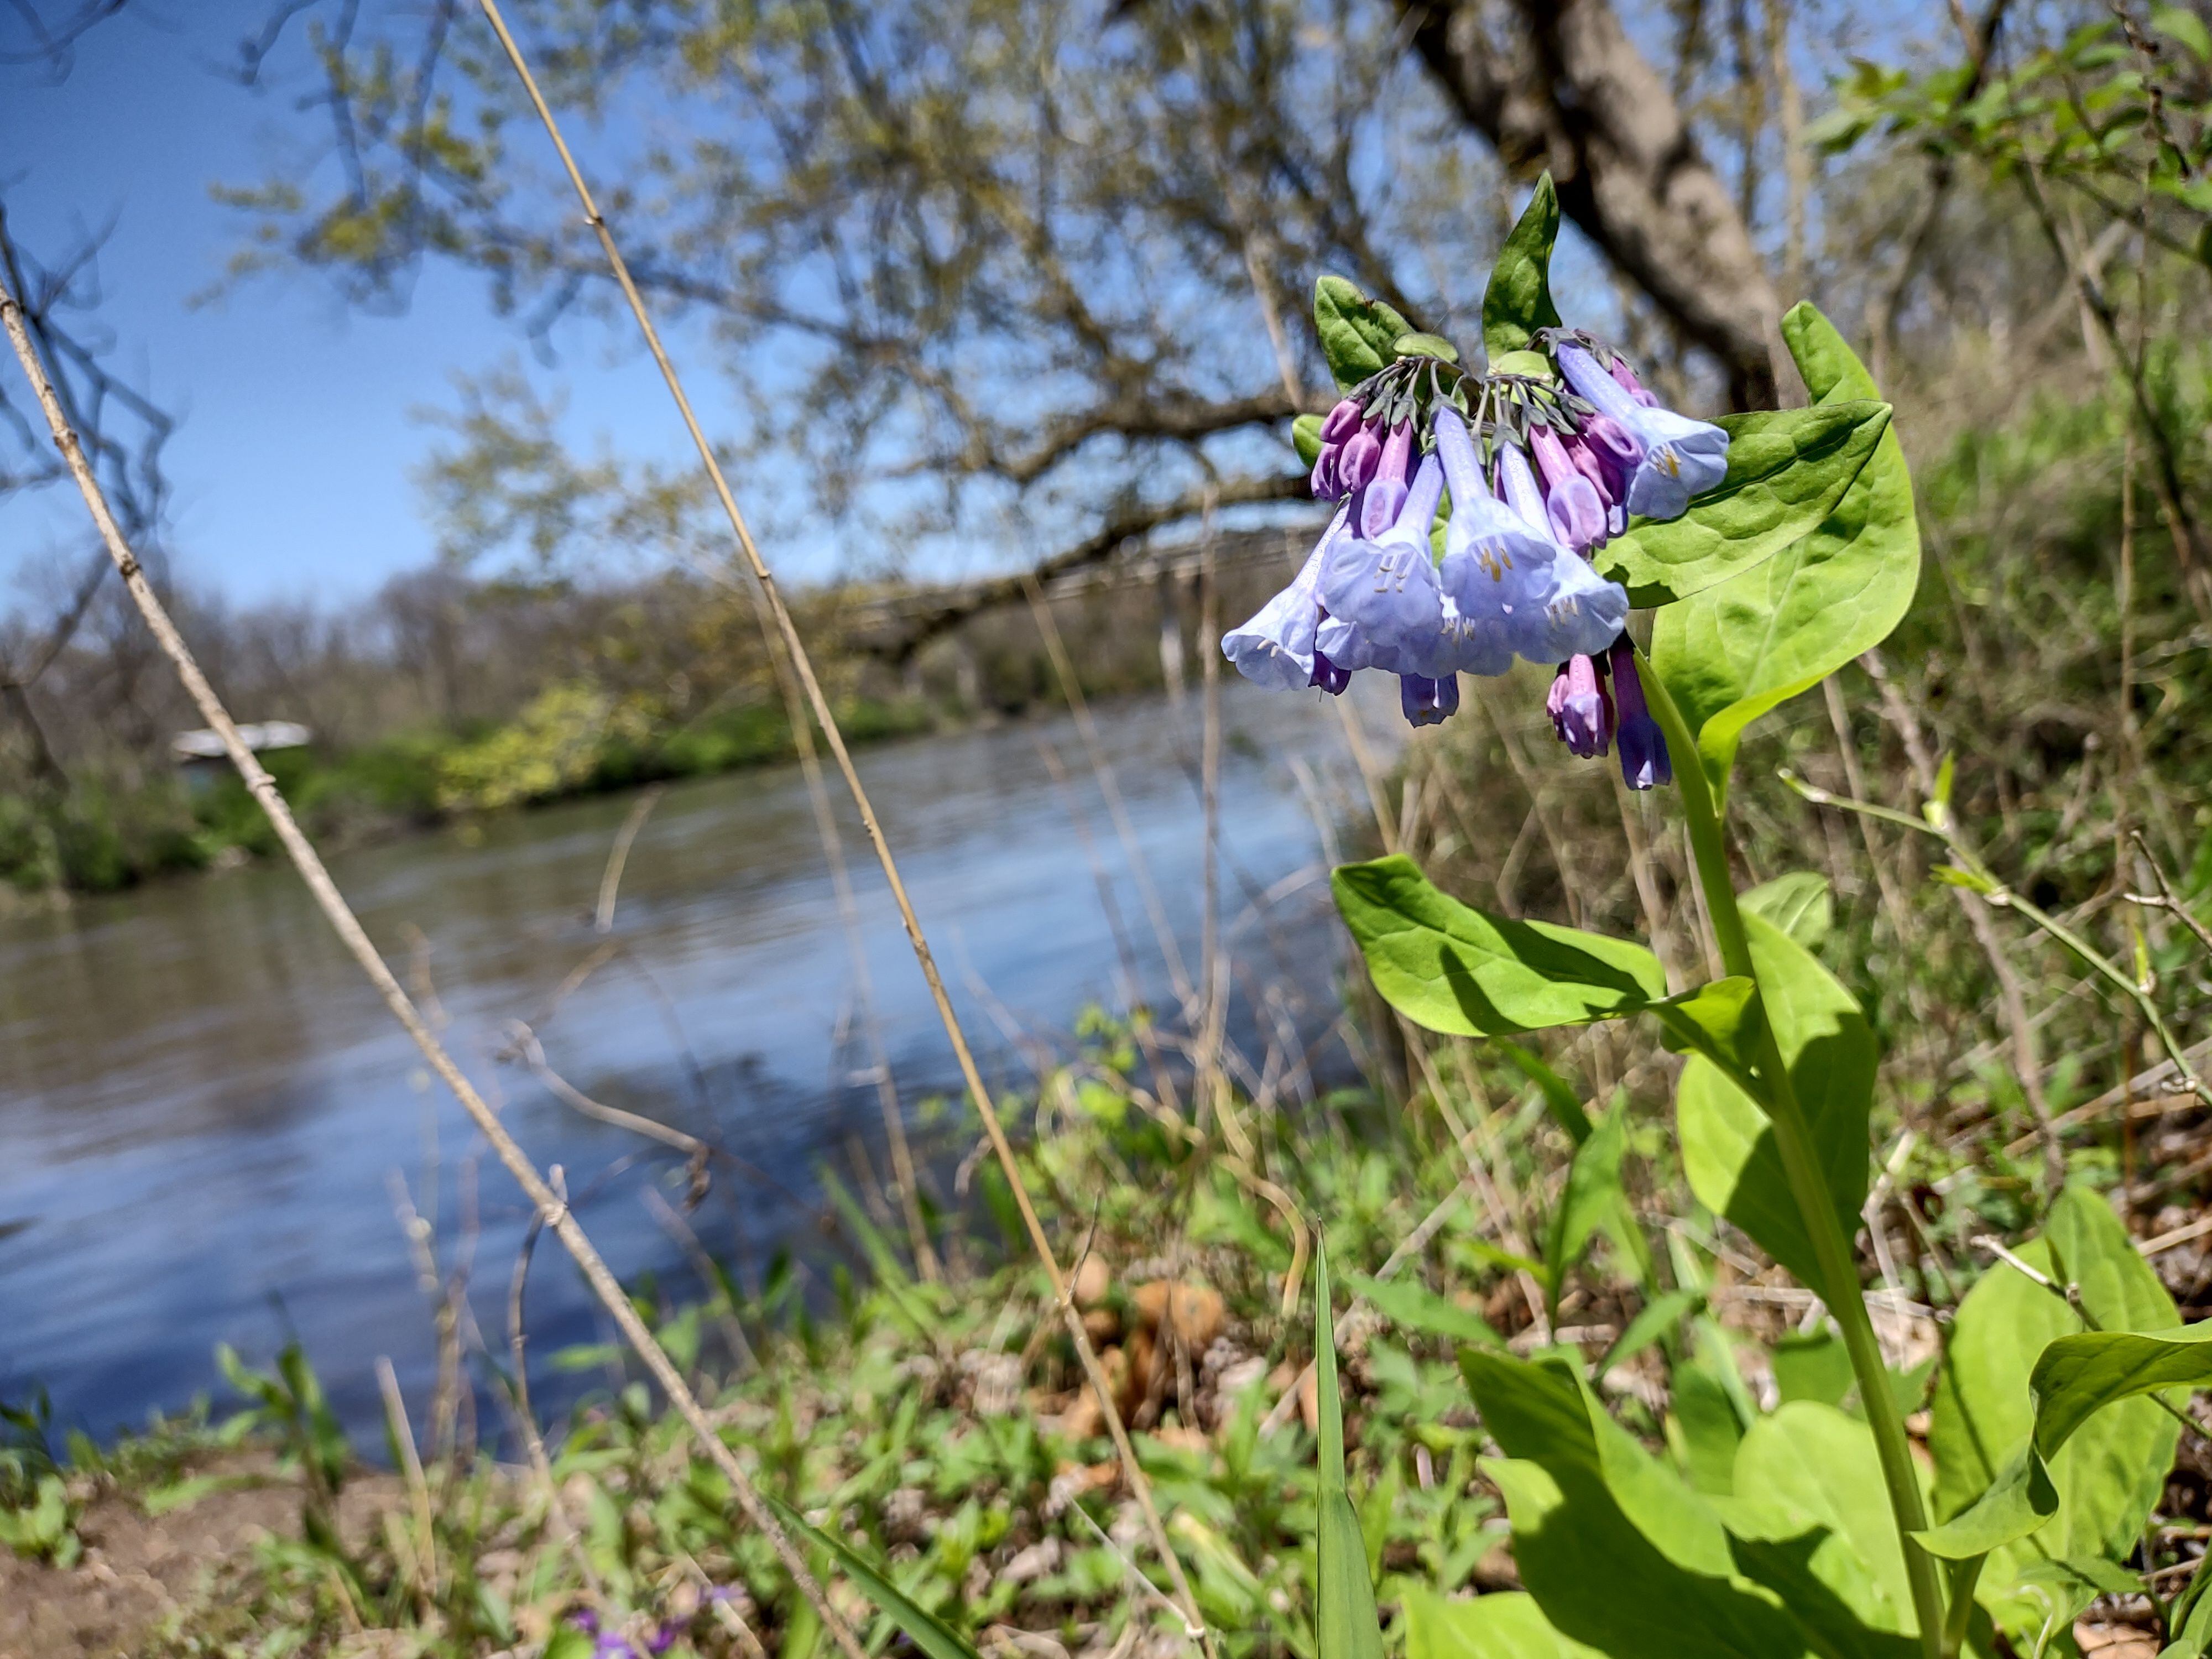 Blue bells have bloomed recently at the Dayton Bluffs Preserve in rural Ottawa along the Fox River.